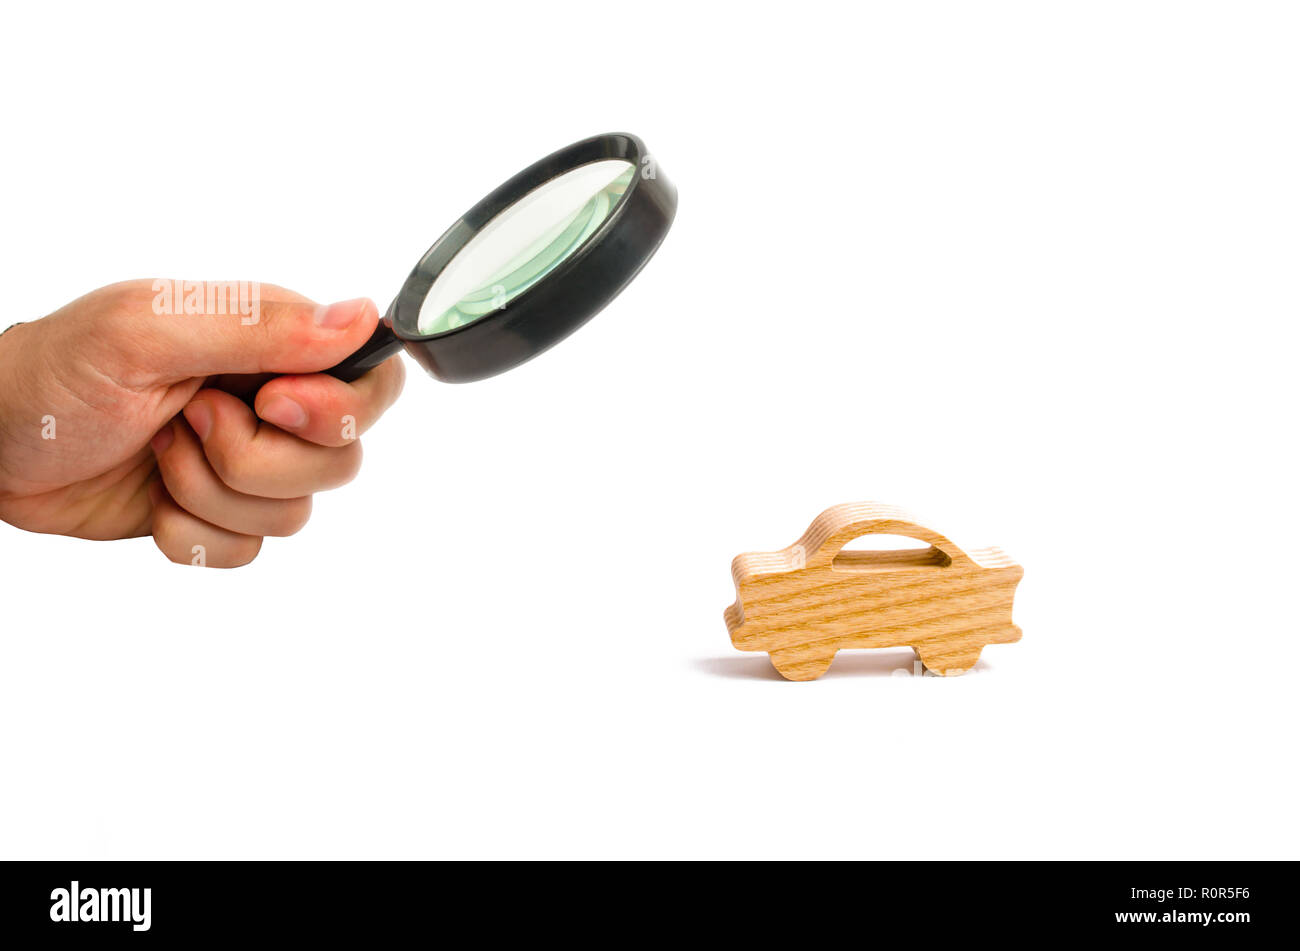 Magnifying glass is looking at the Wooden figurine of a car on a white background. Minimalism. The concept of car insurance, buying and selling cars.  Stock Photo